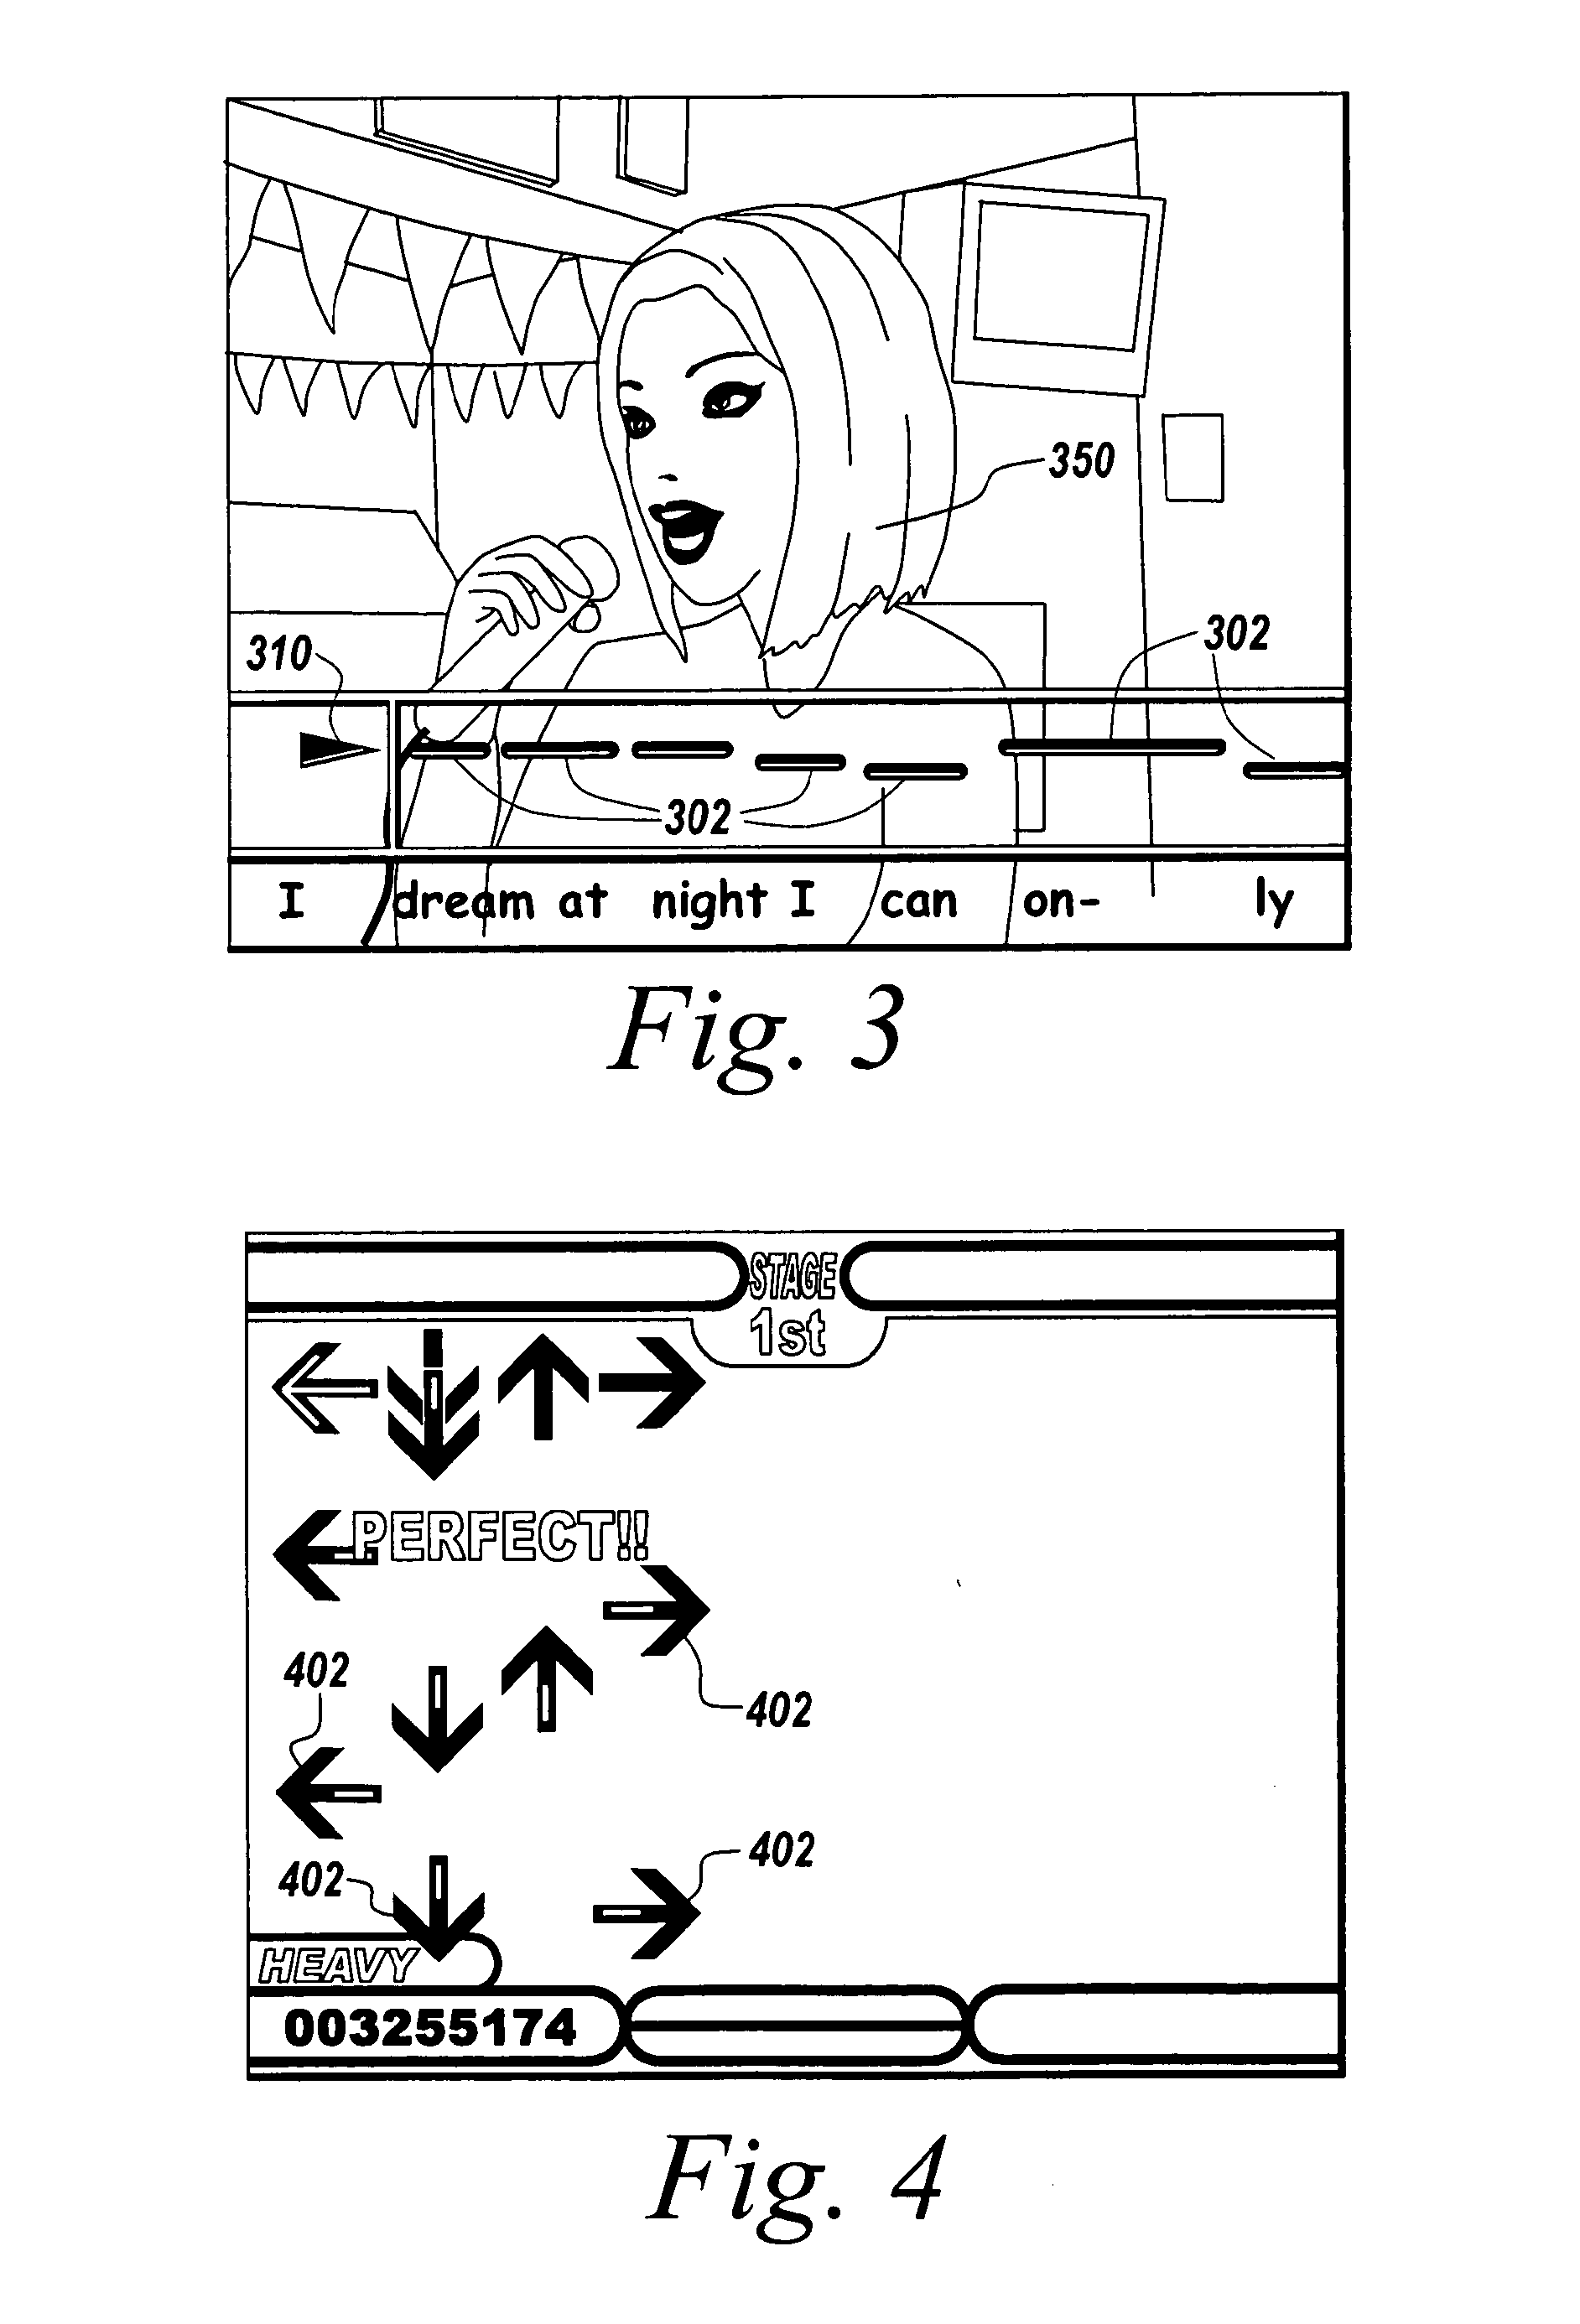 Systems and methods for generating video game content